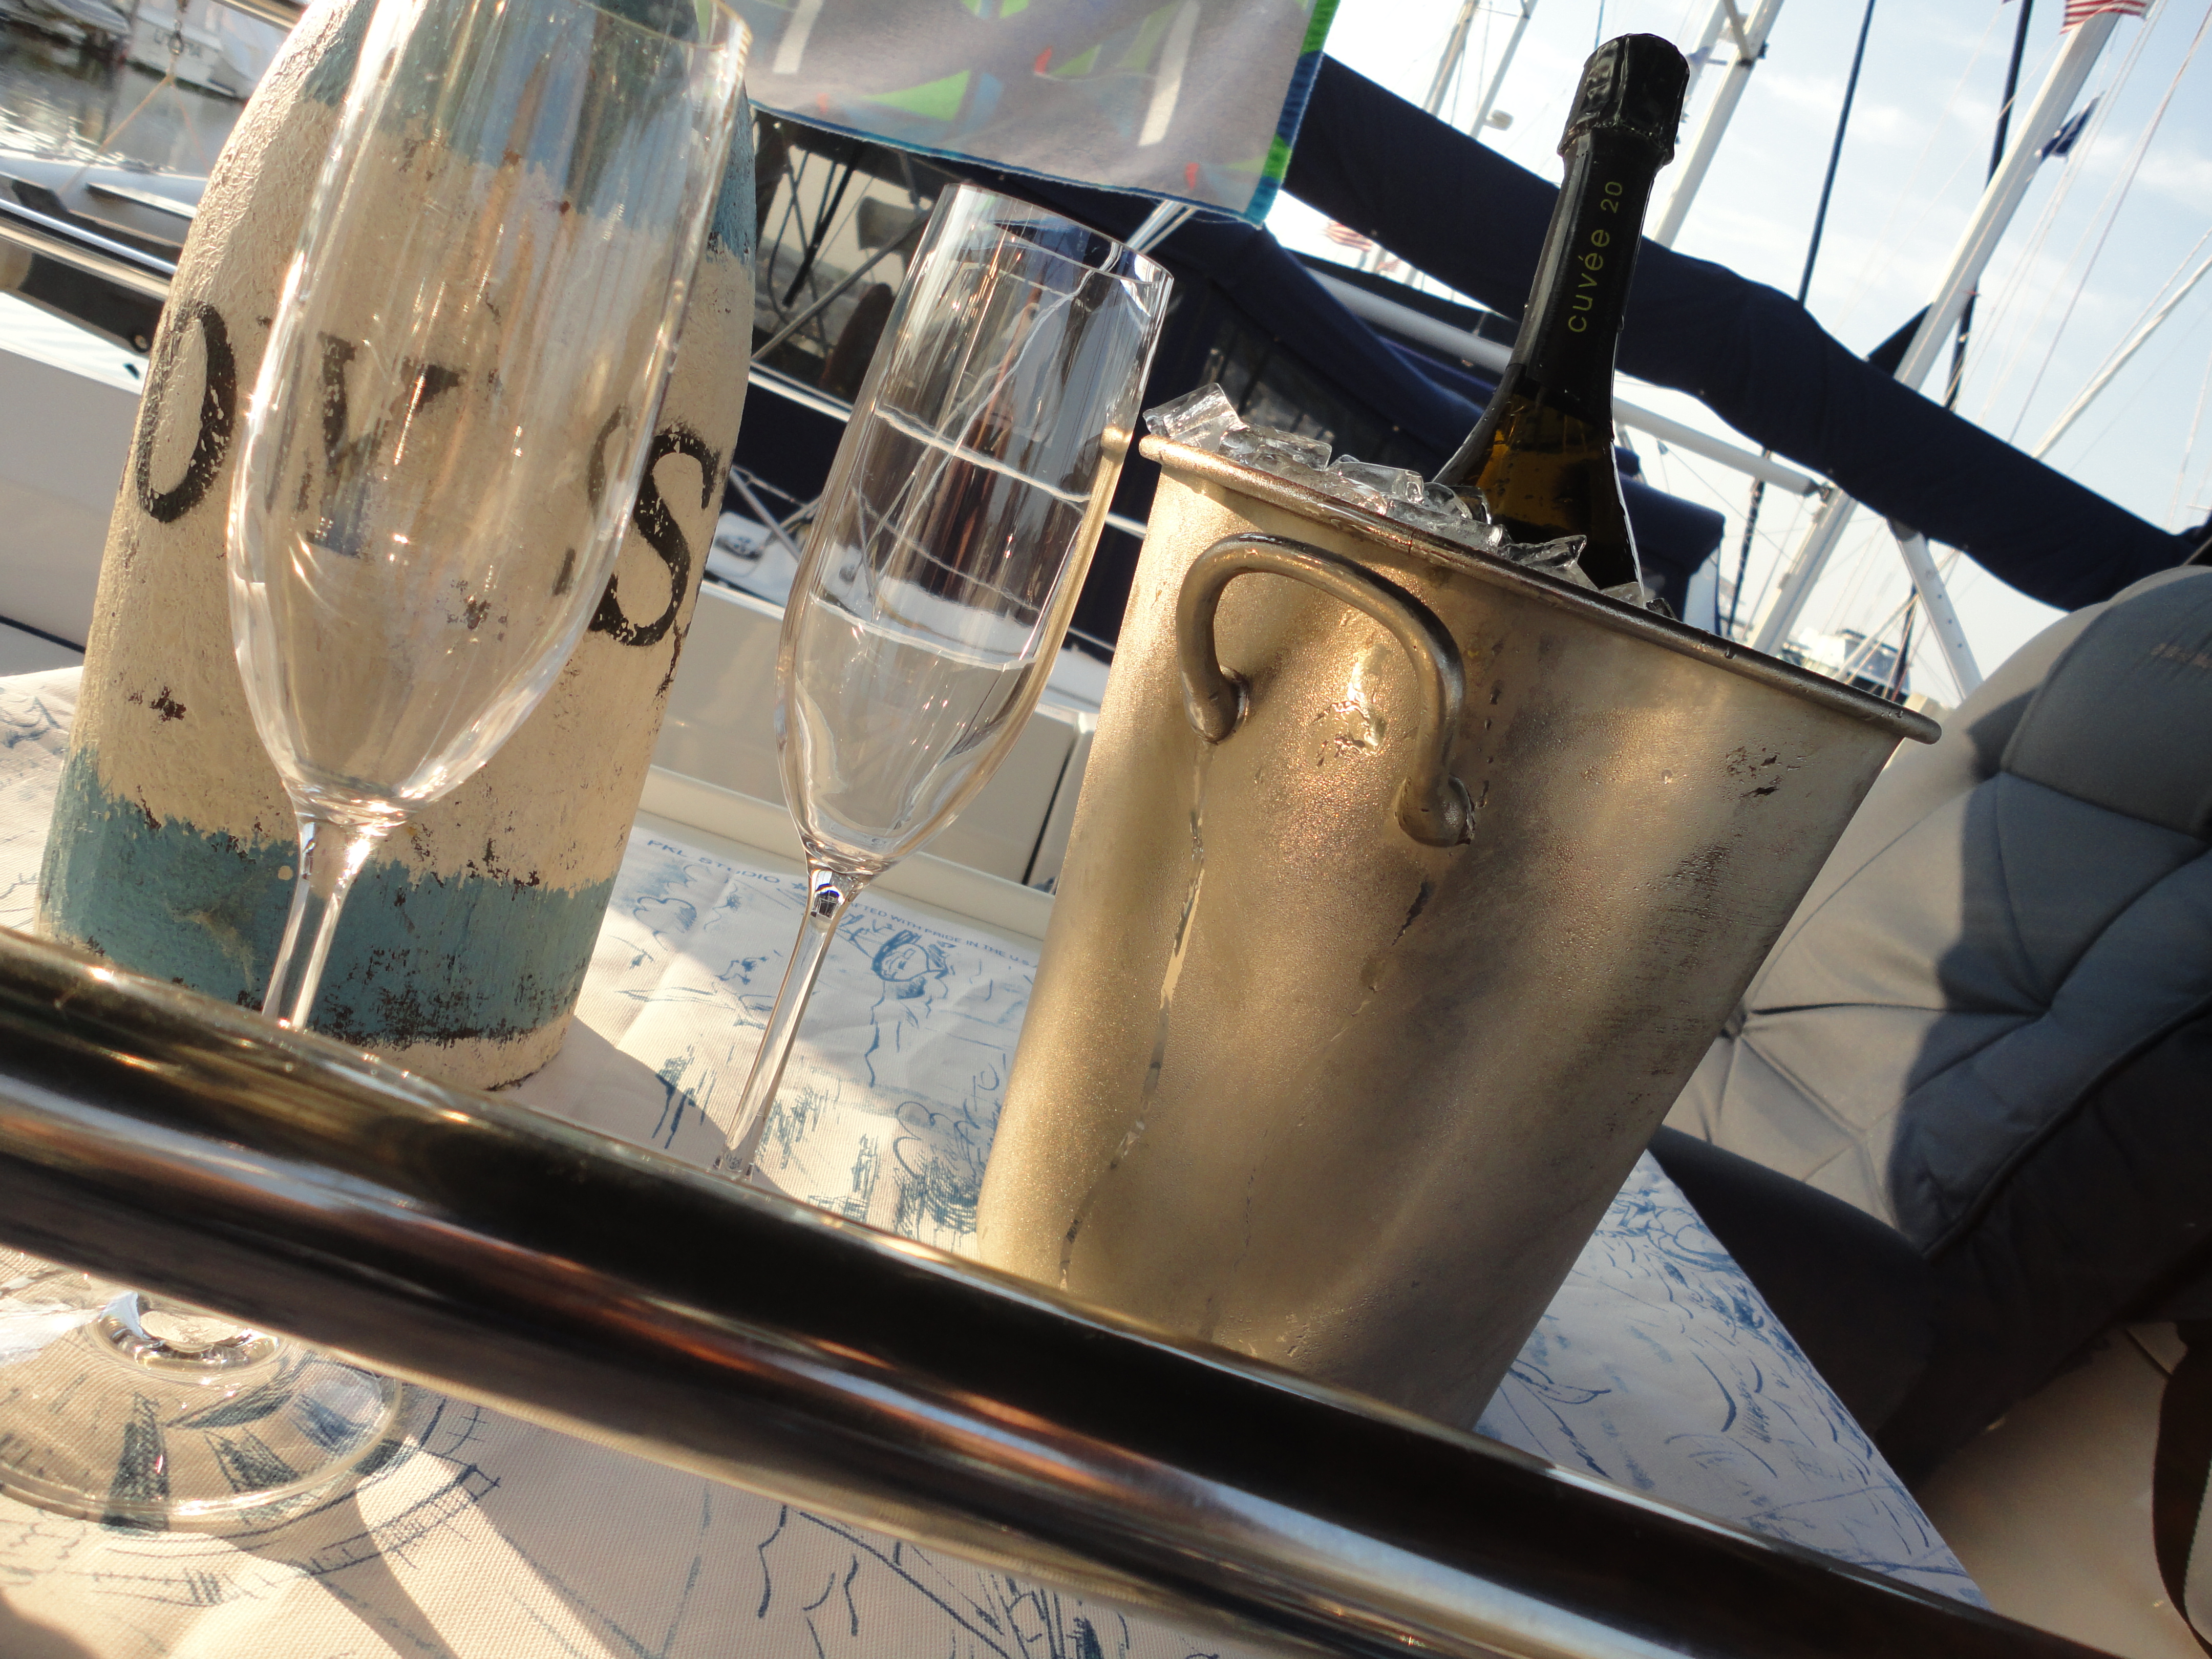 Champagne chilling on the sailboat prior to dinner.